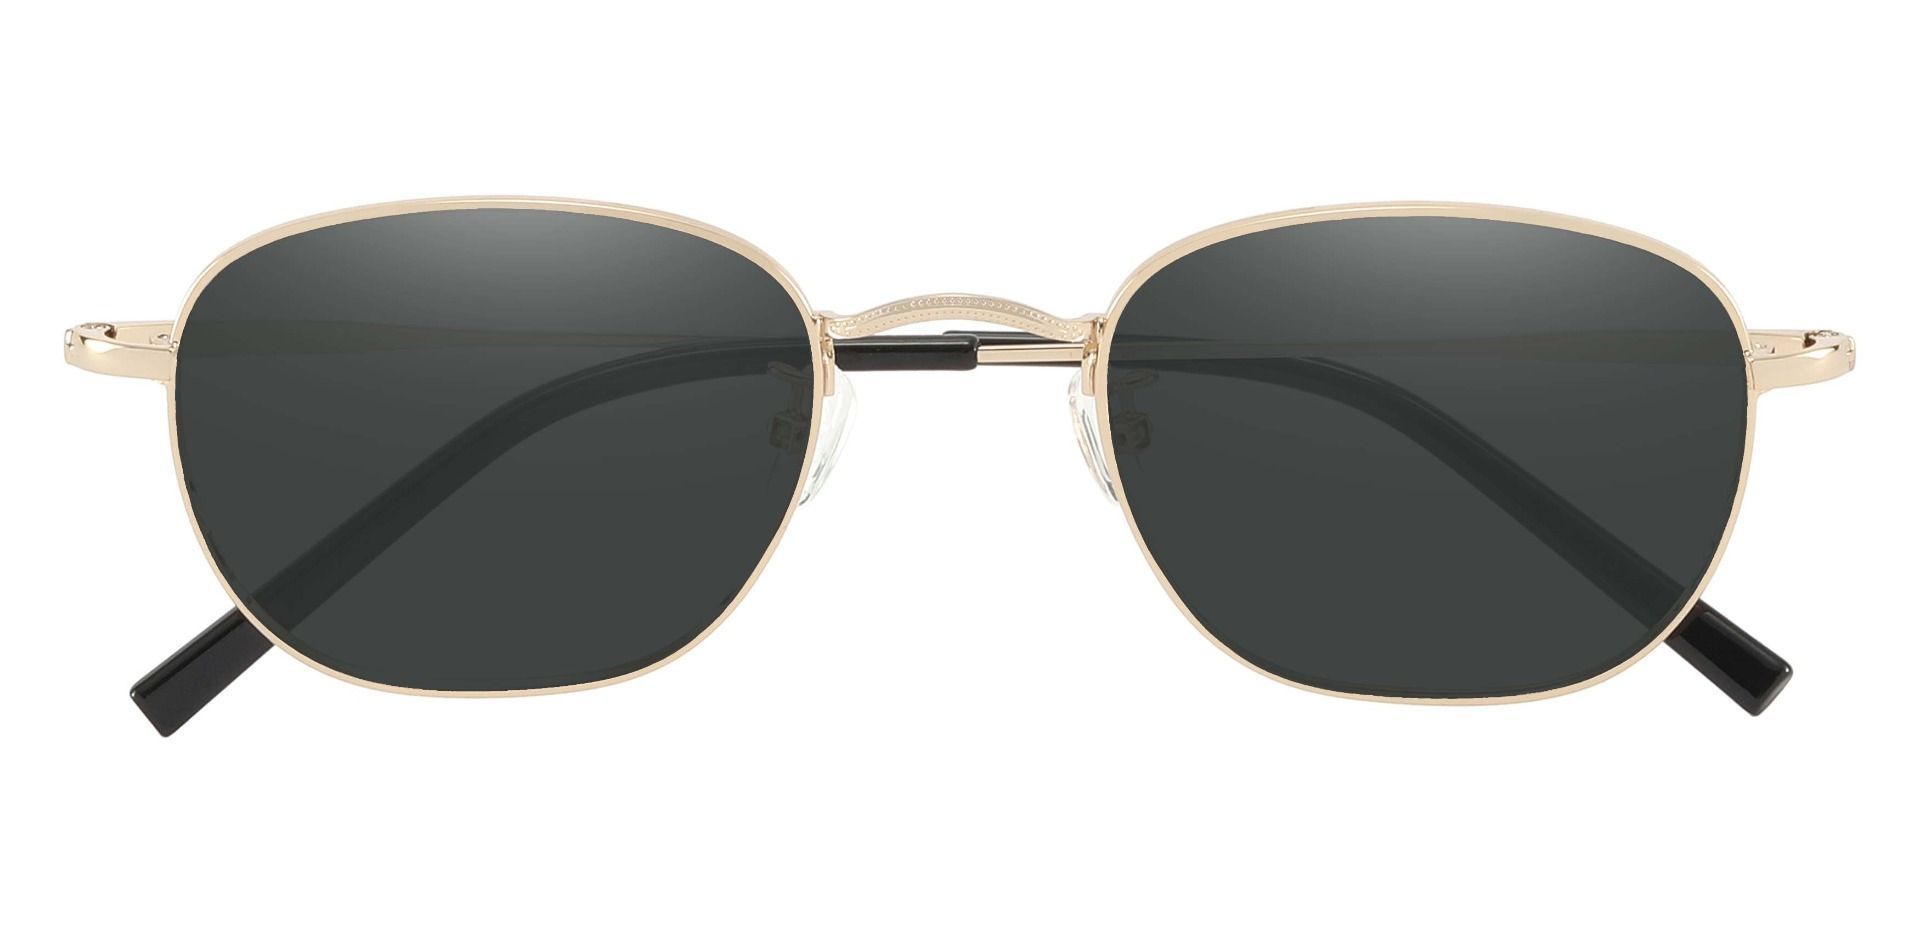 Greece Square Lined Bifocal Sunglasses - Gold Frame With Gray Lenses